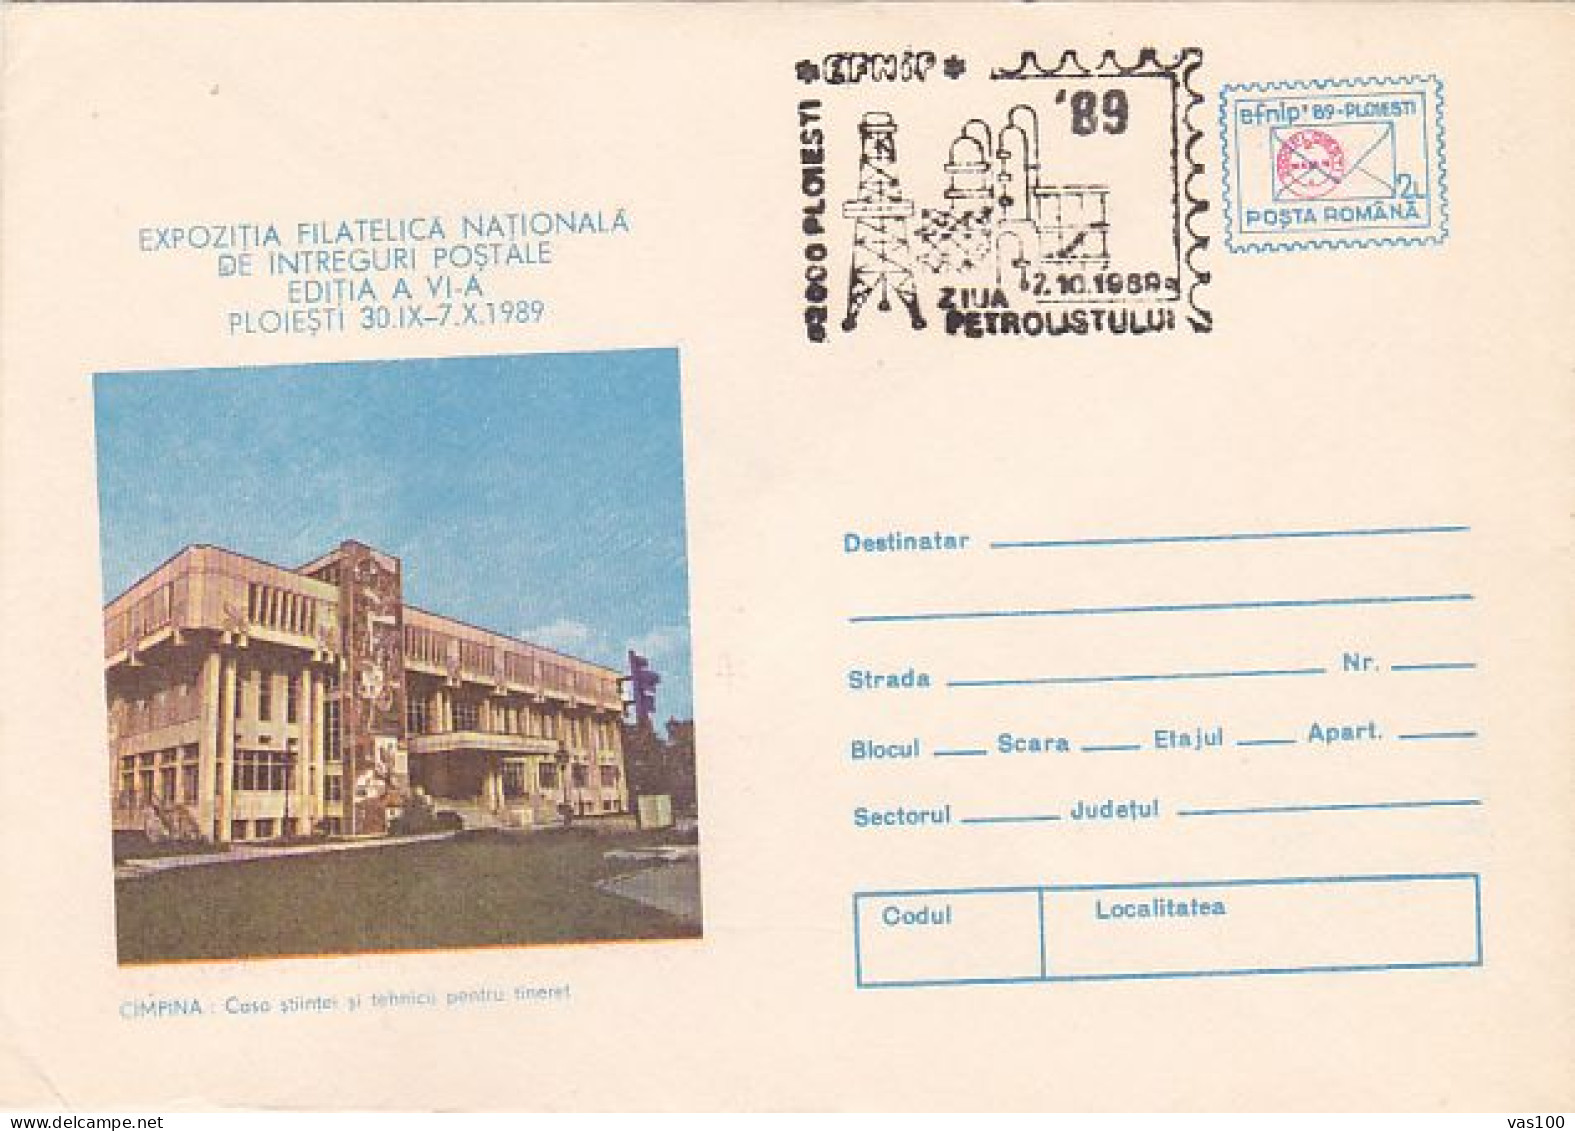 SCIENCE, ENERGY OIL, OIL WORKER DAY POSTMARK ON CAMPINA CULTURE HOUSE, COVER STATIONERY, ENTIER POSTAL, 1989, ROMANIA - Pétrole